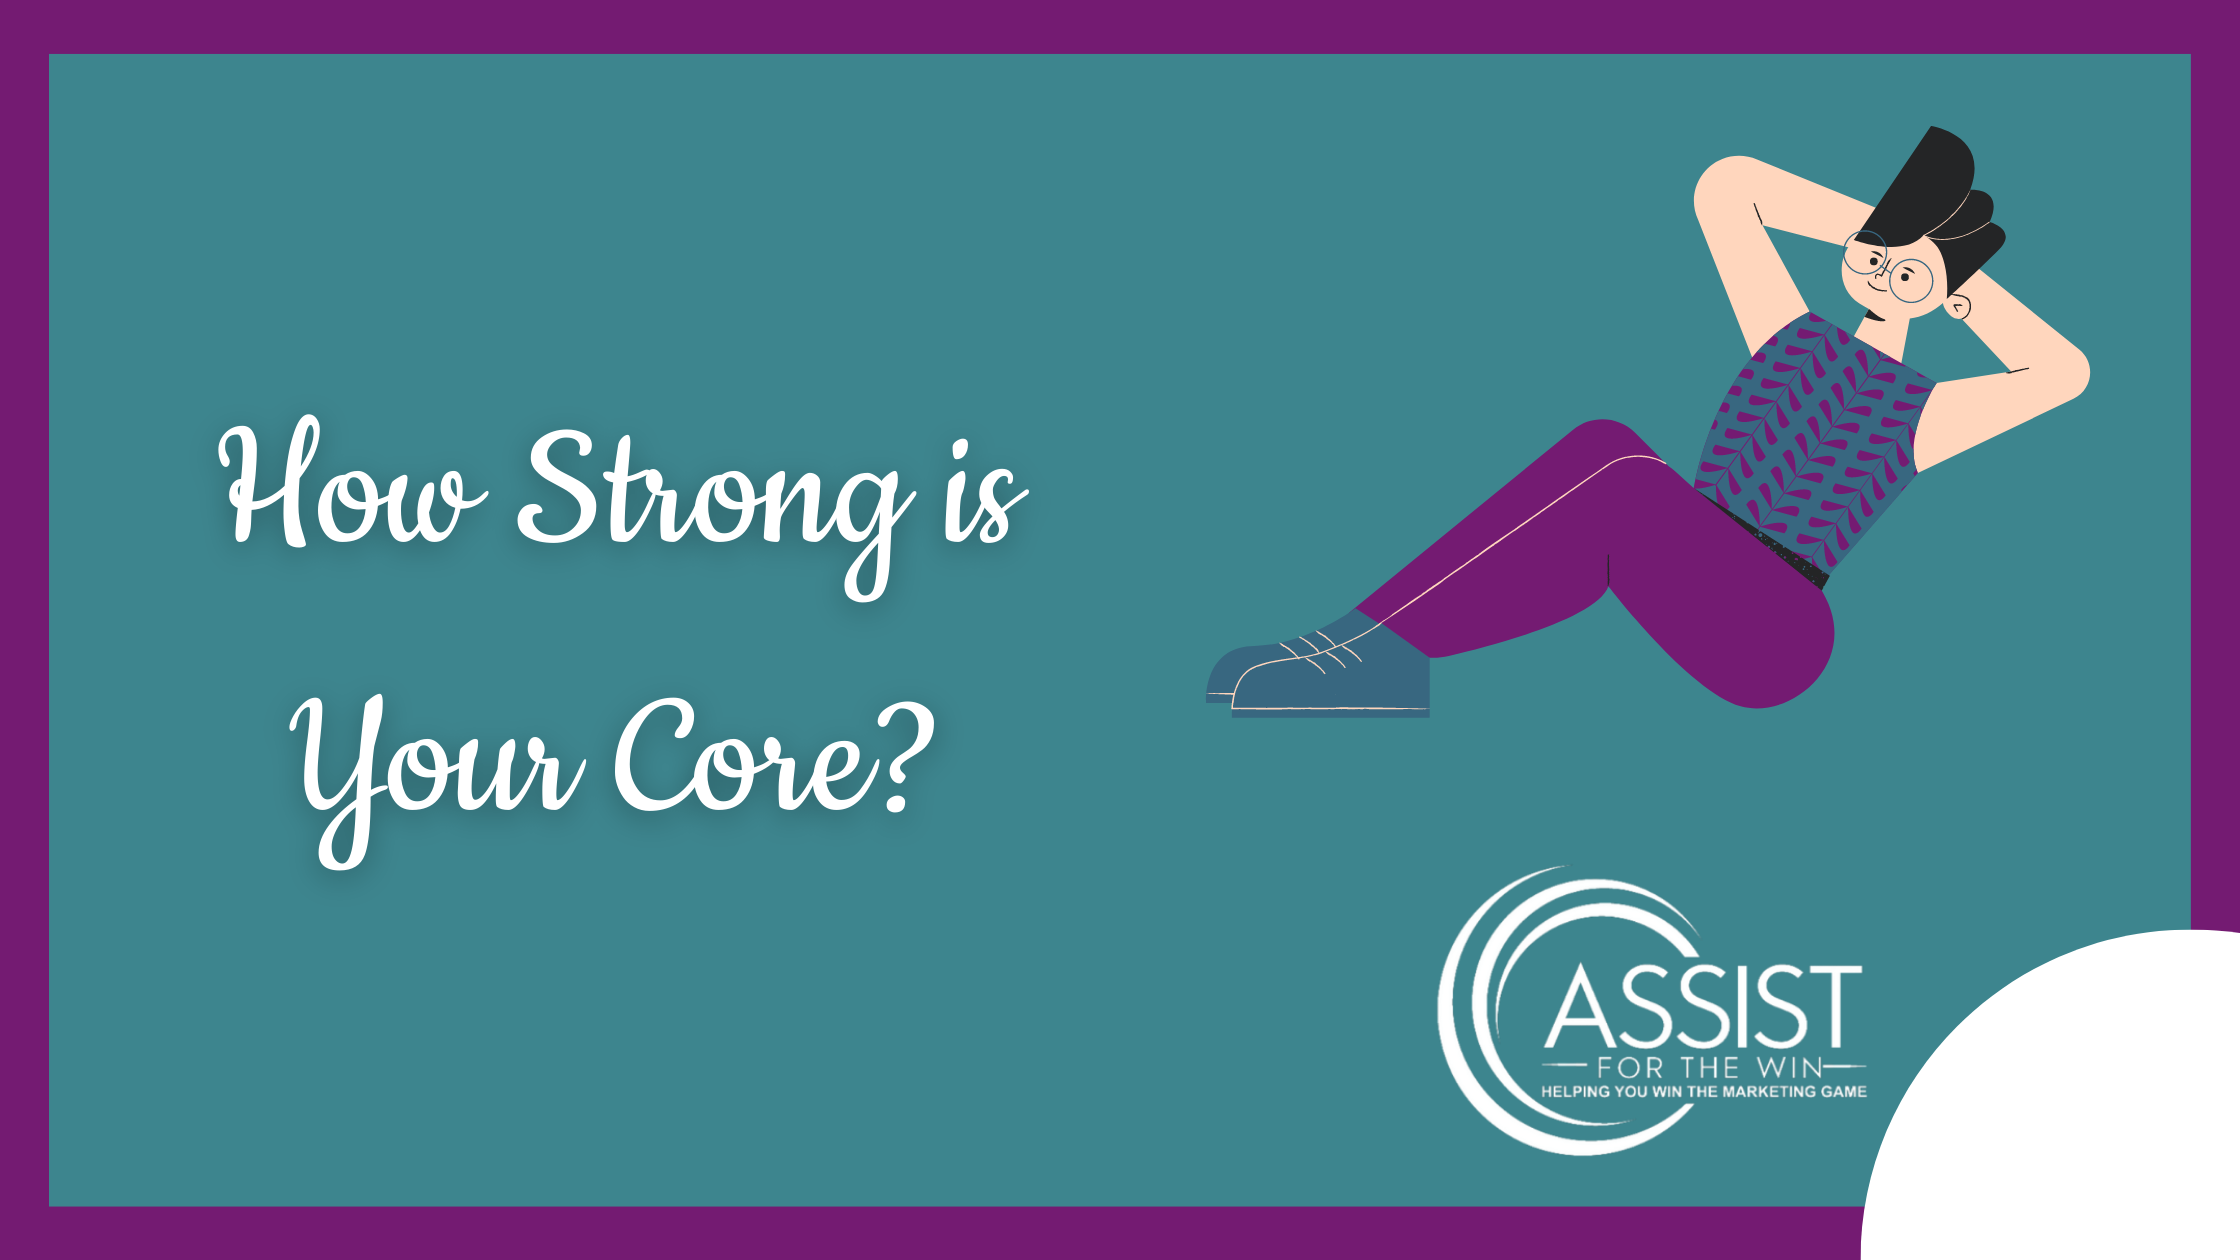 How Strong is Your Core?